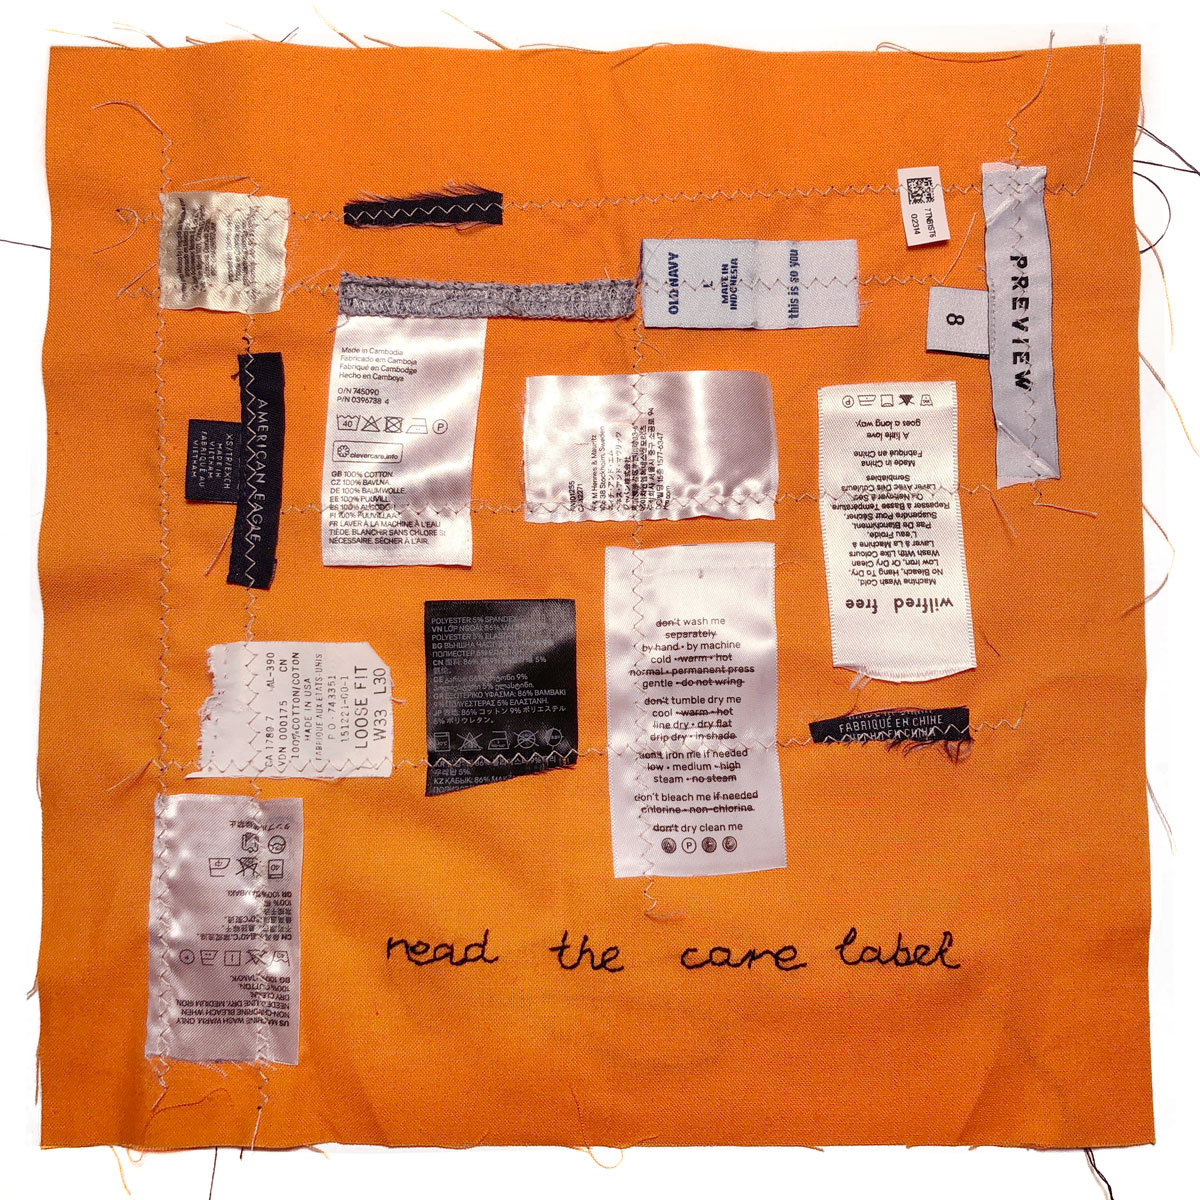 A hand square of fabric with clothing labels and the text 'Read the care label' sewn into the design. Part of the Textile Upcycling Manifesto by Liz Broekhuyse